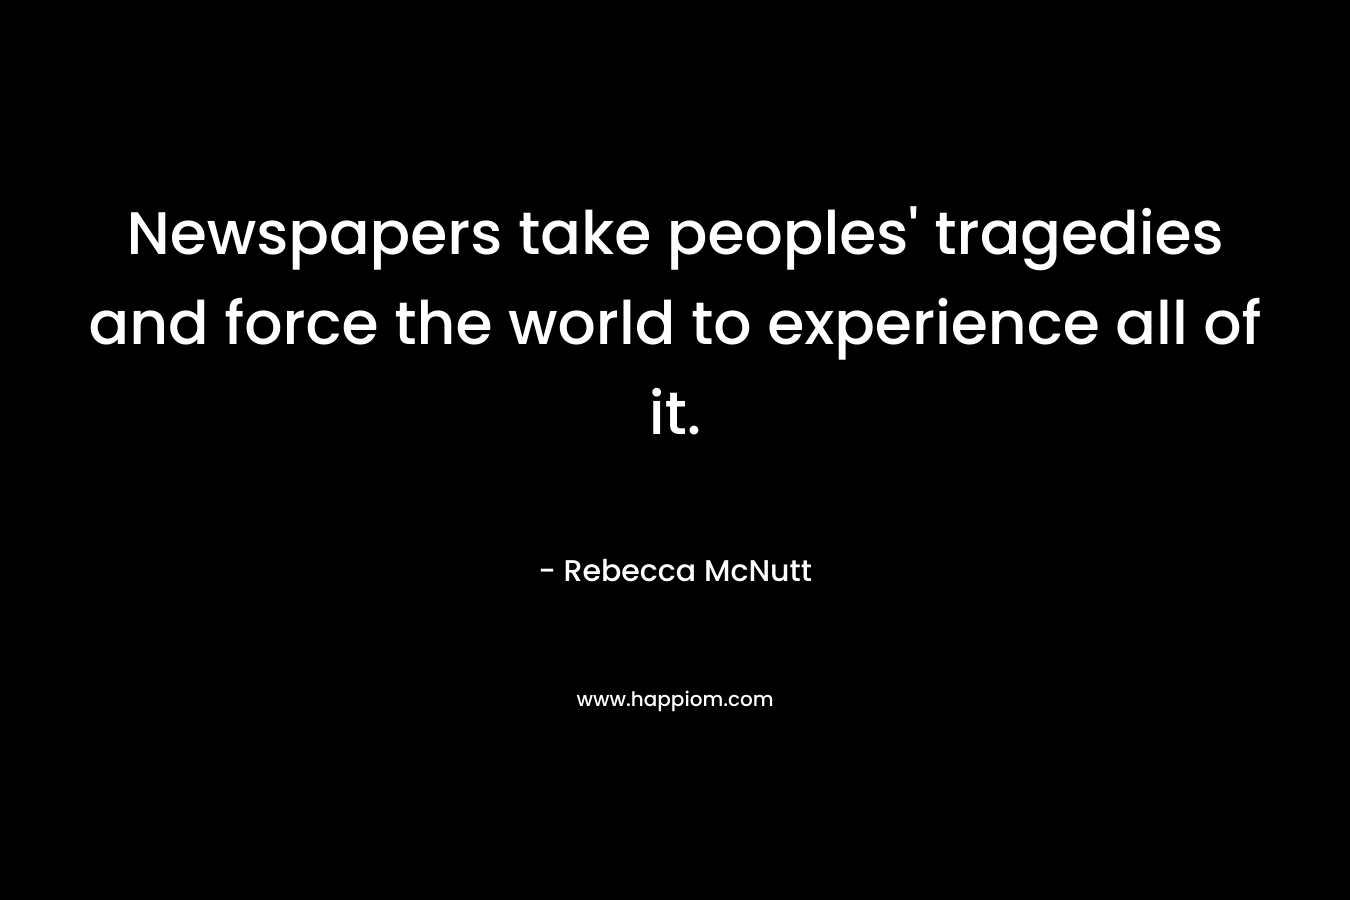 Newspapers take peoples’ tragedies and force the world to experience all of it. – Rebecca McNutt